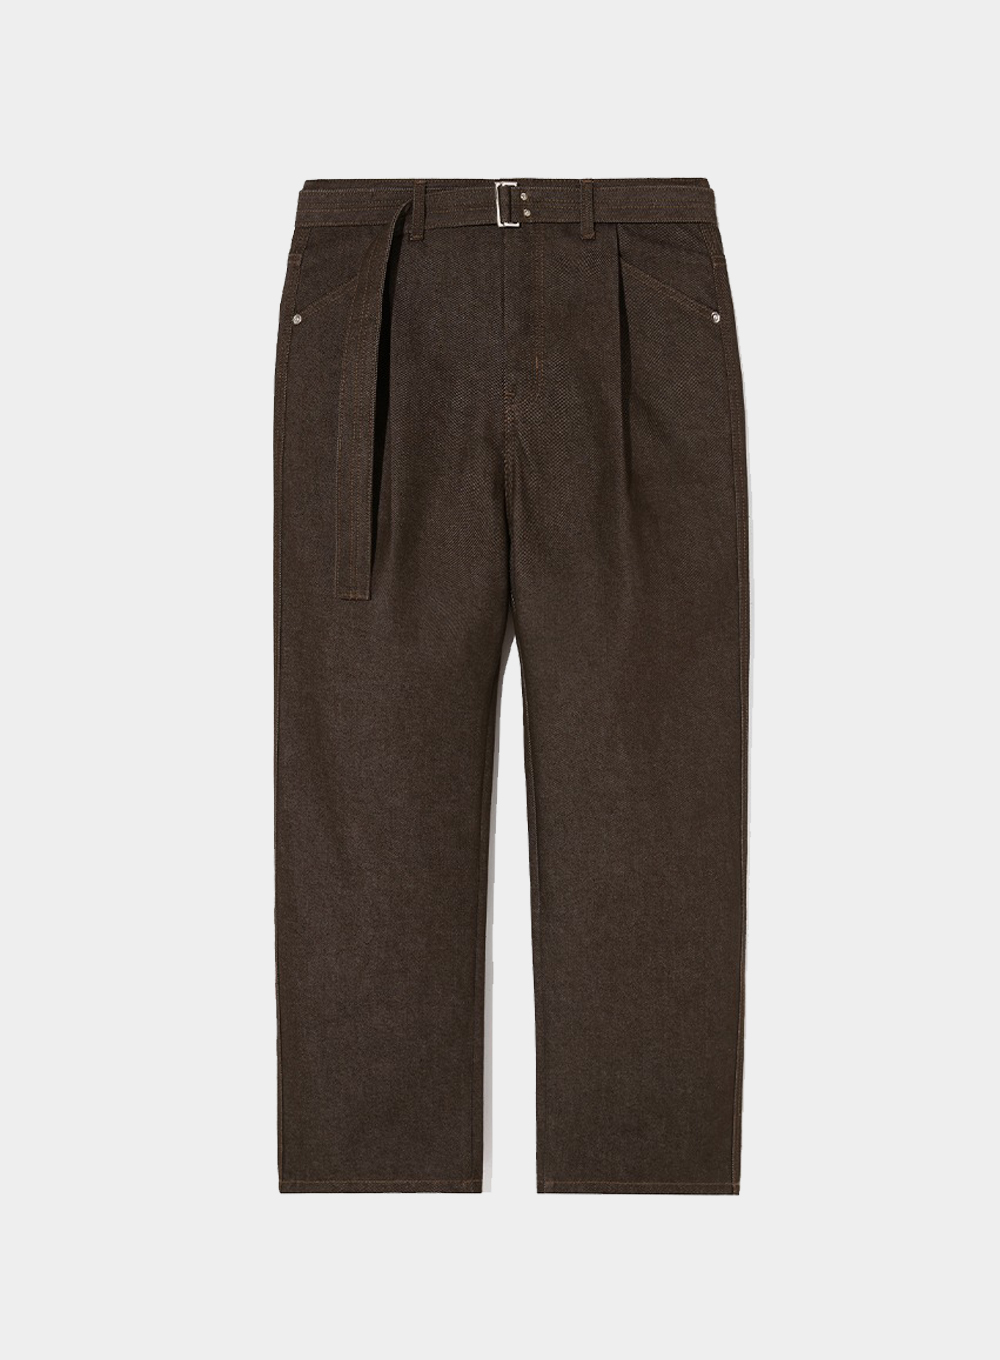 Cayenne One Tuck Tailored Belted Denim - Sepia Brown